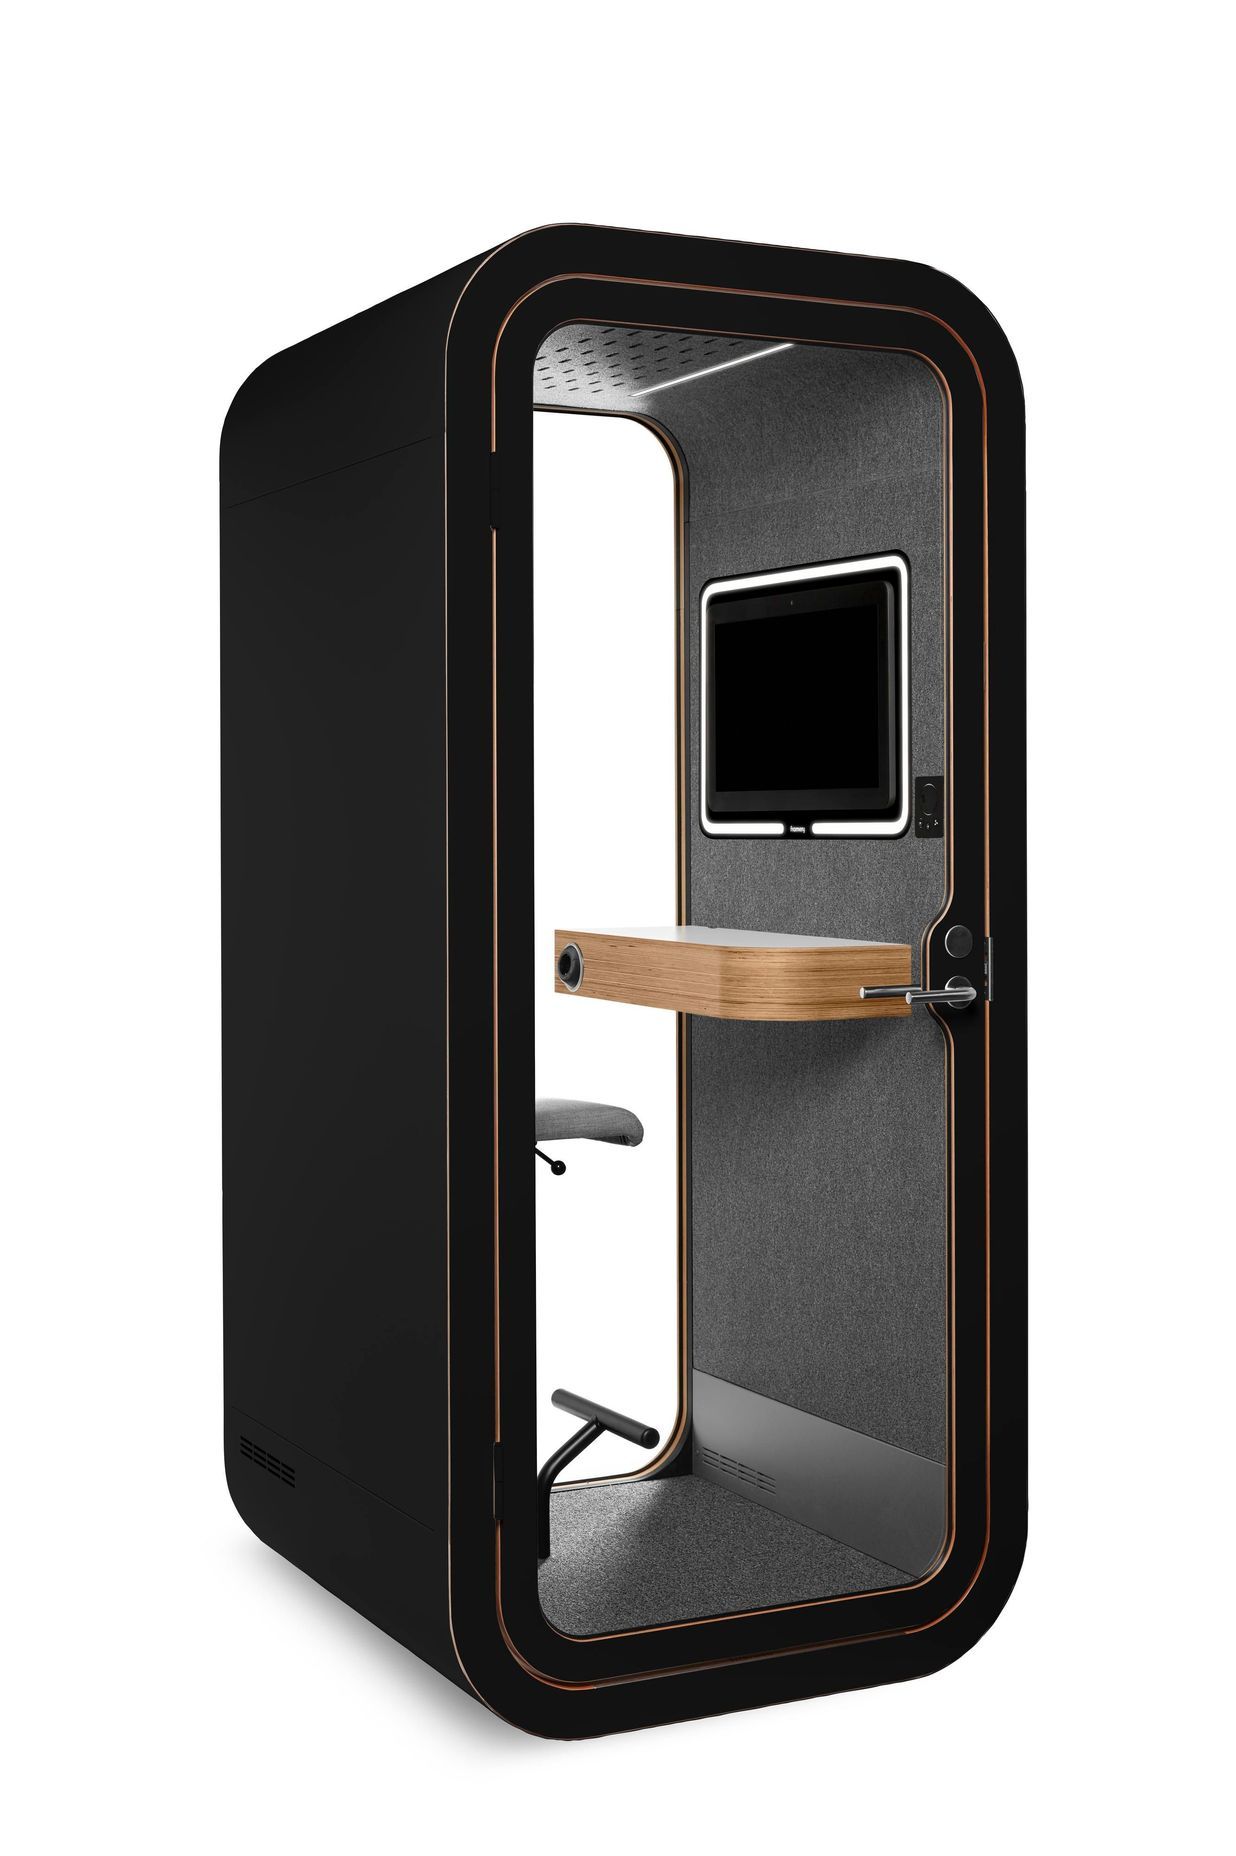 Lifecycle Costs: Conference Rooms vs. Framery Pods